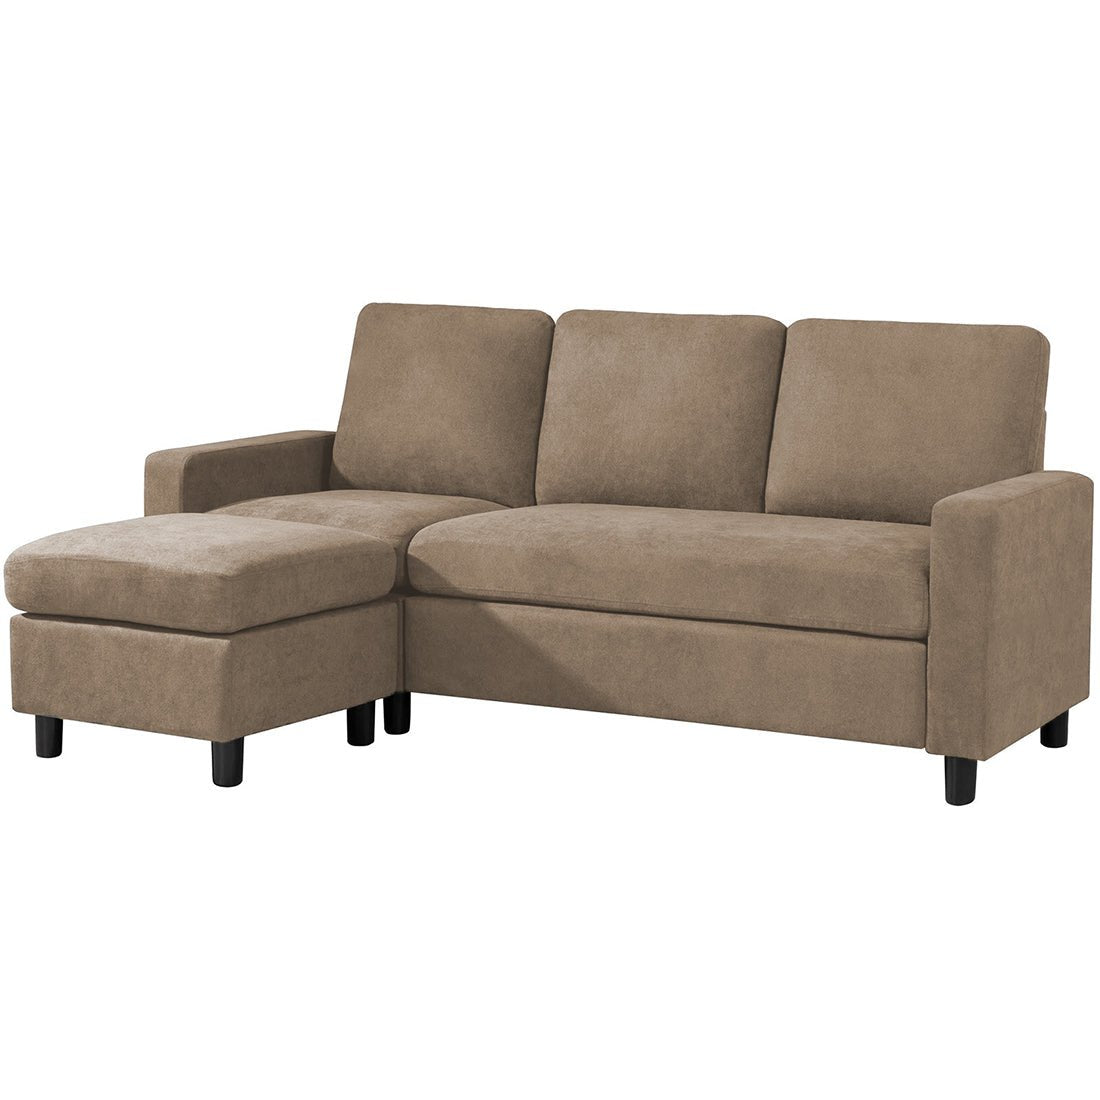 Notch 4 Seater Reversible Modular Sofa & Chaise with Ottoman - Torque India